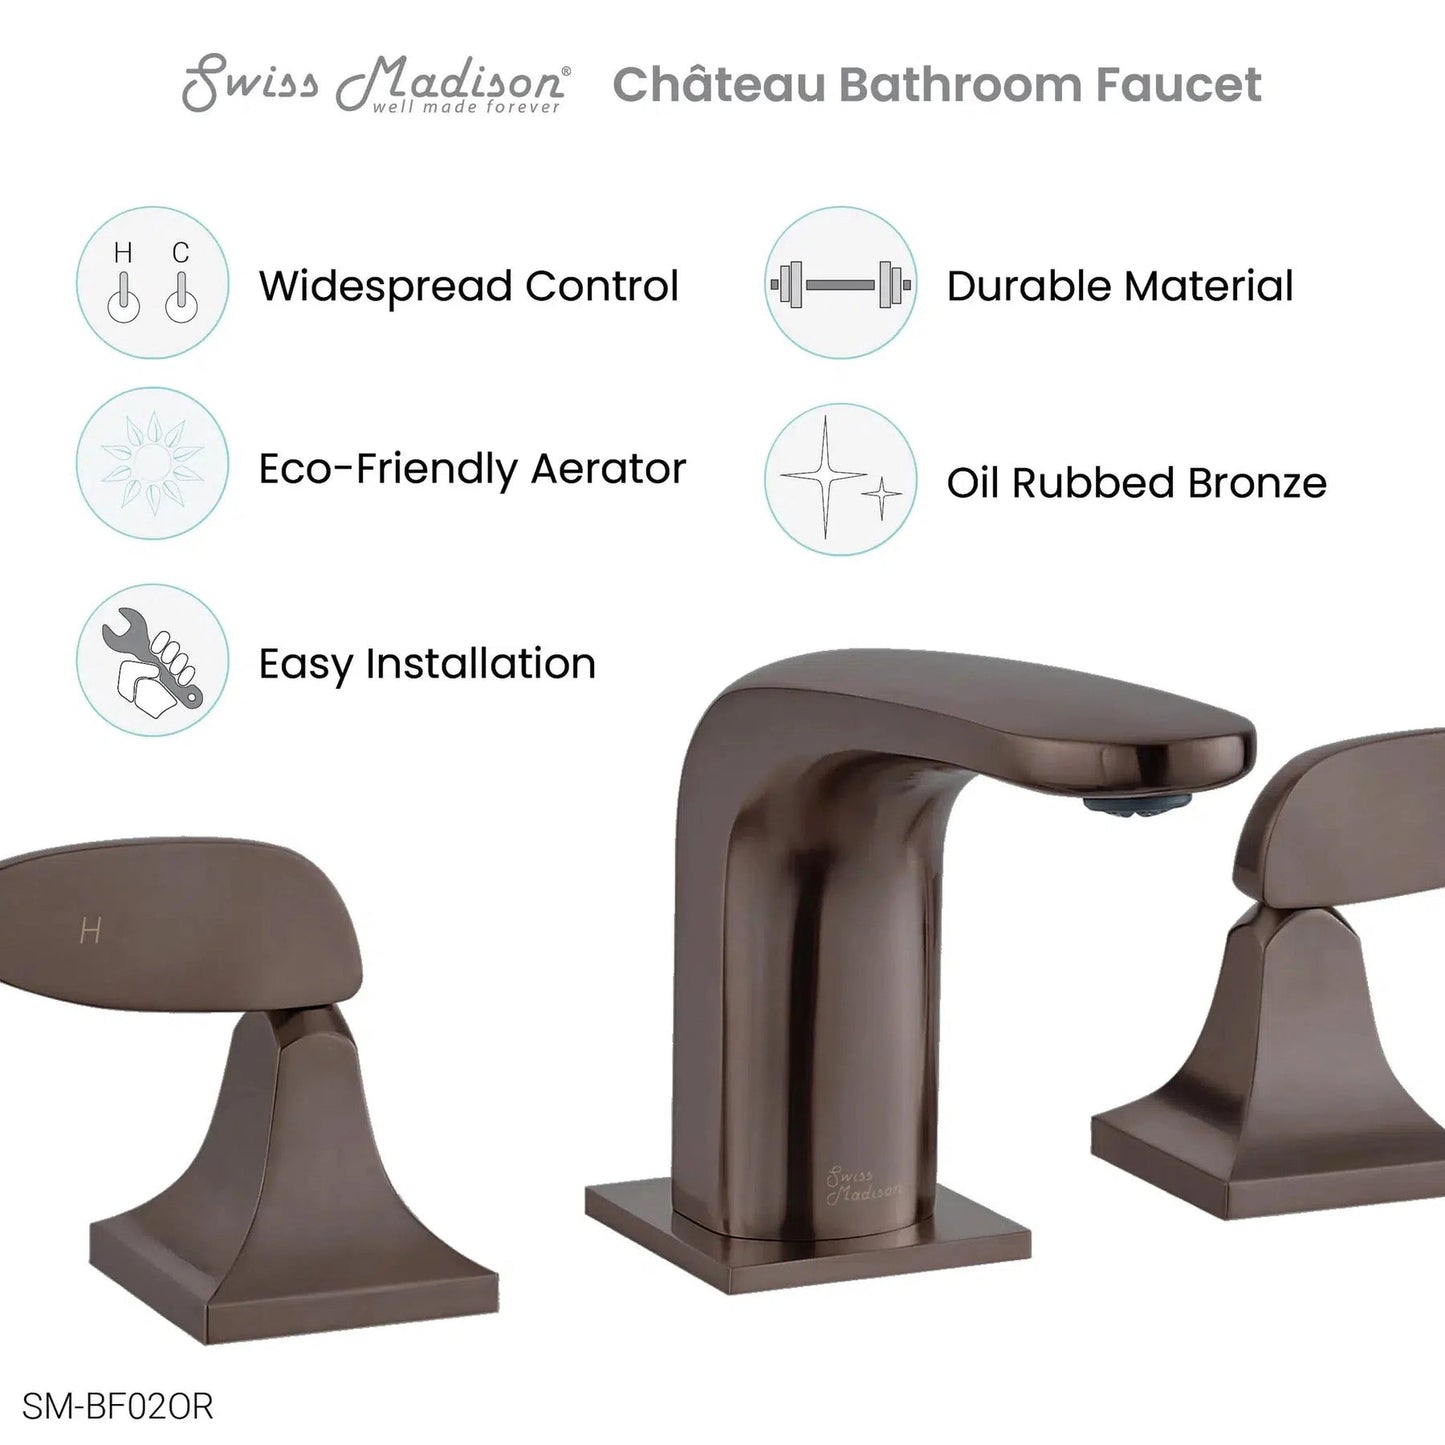 Swiss Madison Château 8" Oil Rubbed Bronze Widespread Bathroom Faucet With Flow Rate of 1.2 GPM